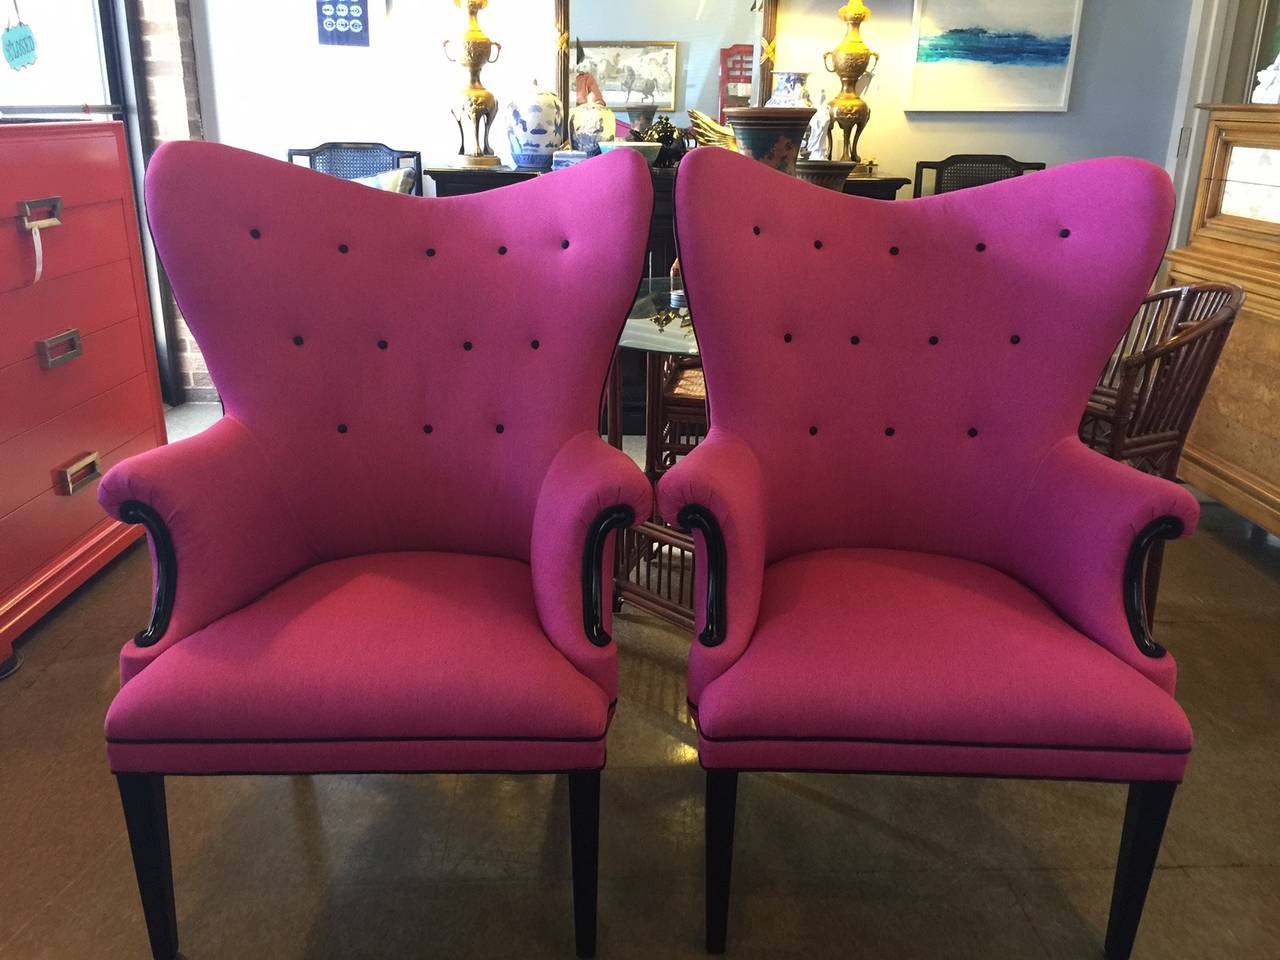 American Wingback Hot Pink and Black Linen Chairs- Only One Remaining!!